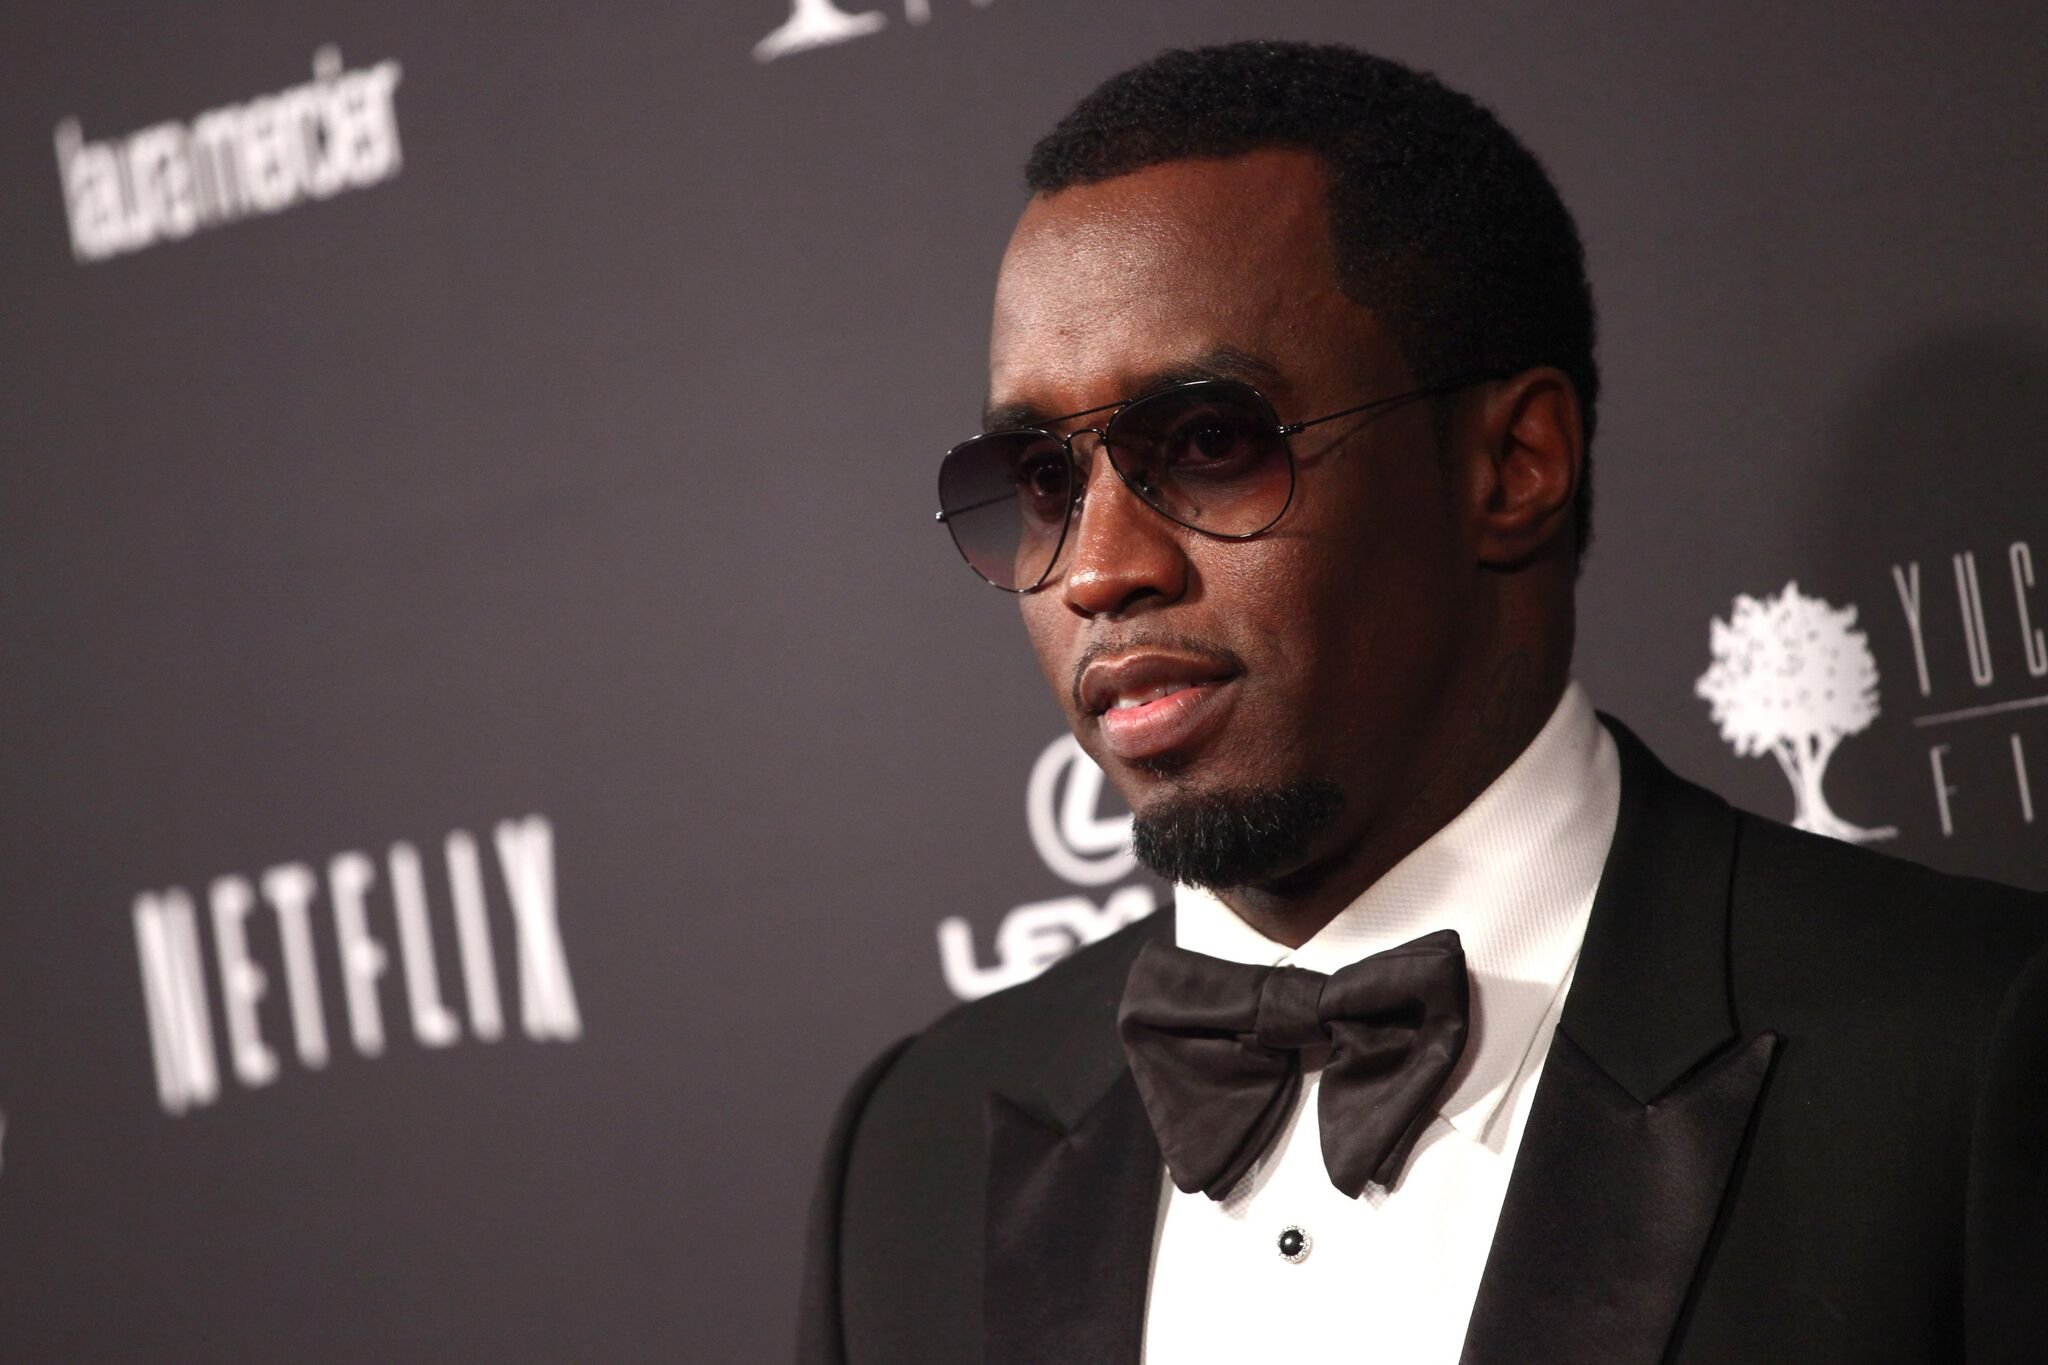 Sean Combs attends the Weinstein Company's 2014 Golden Globe Awards after party | Photo: Getty Images